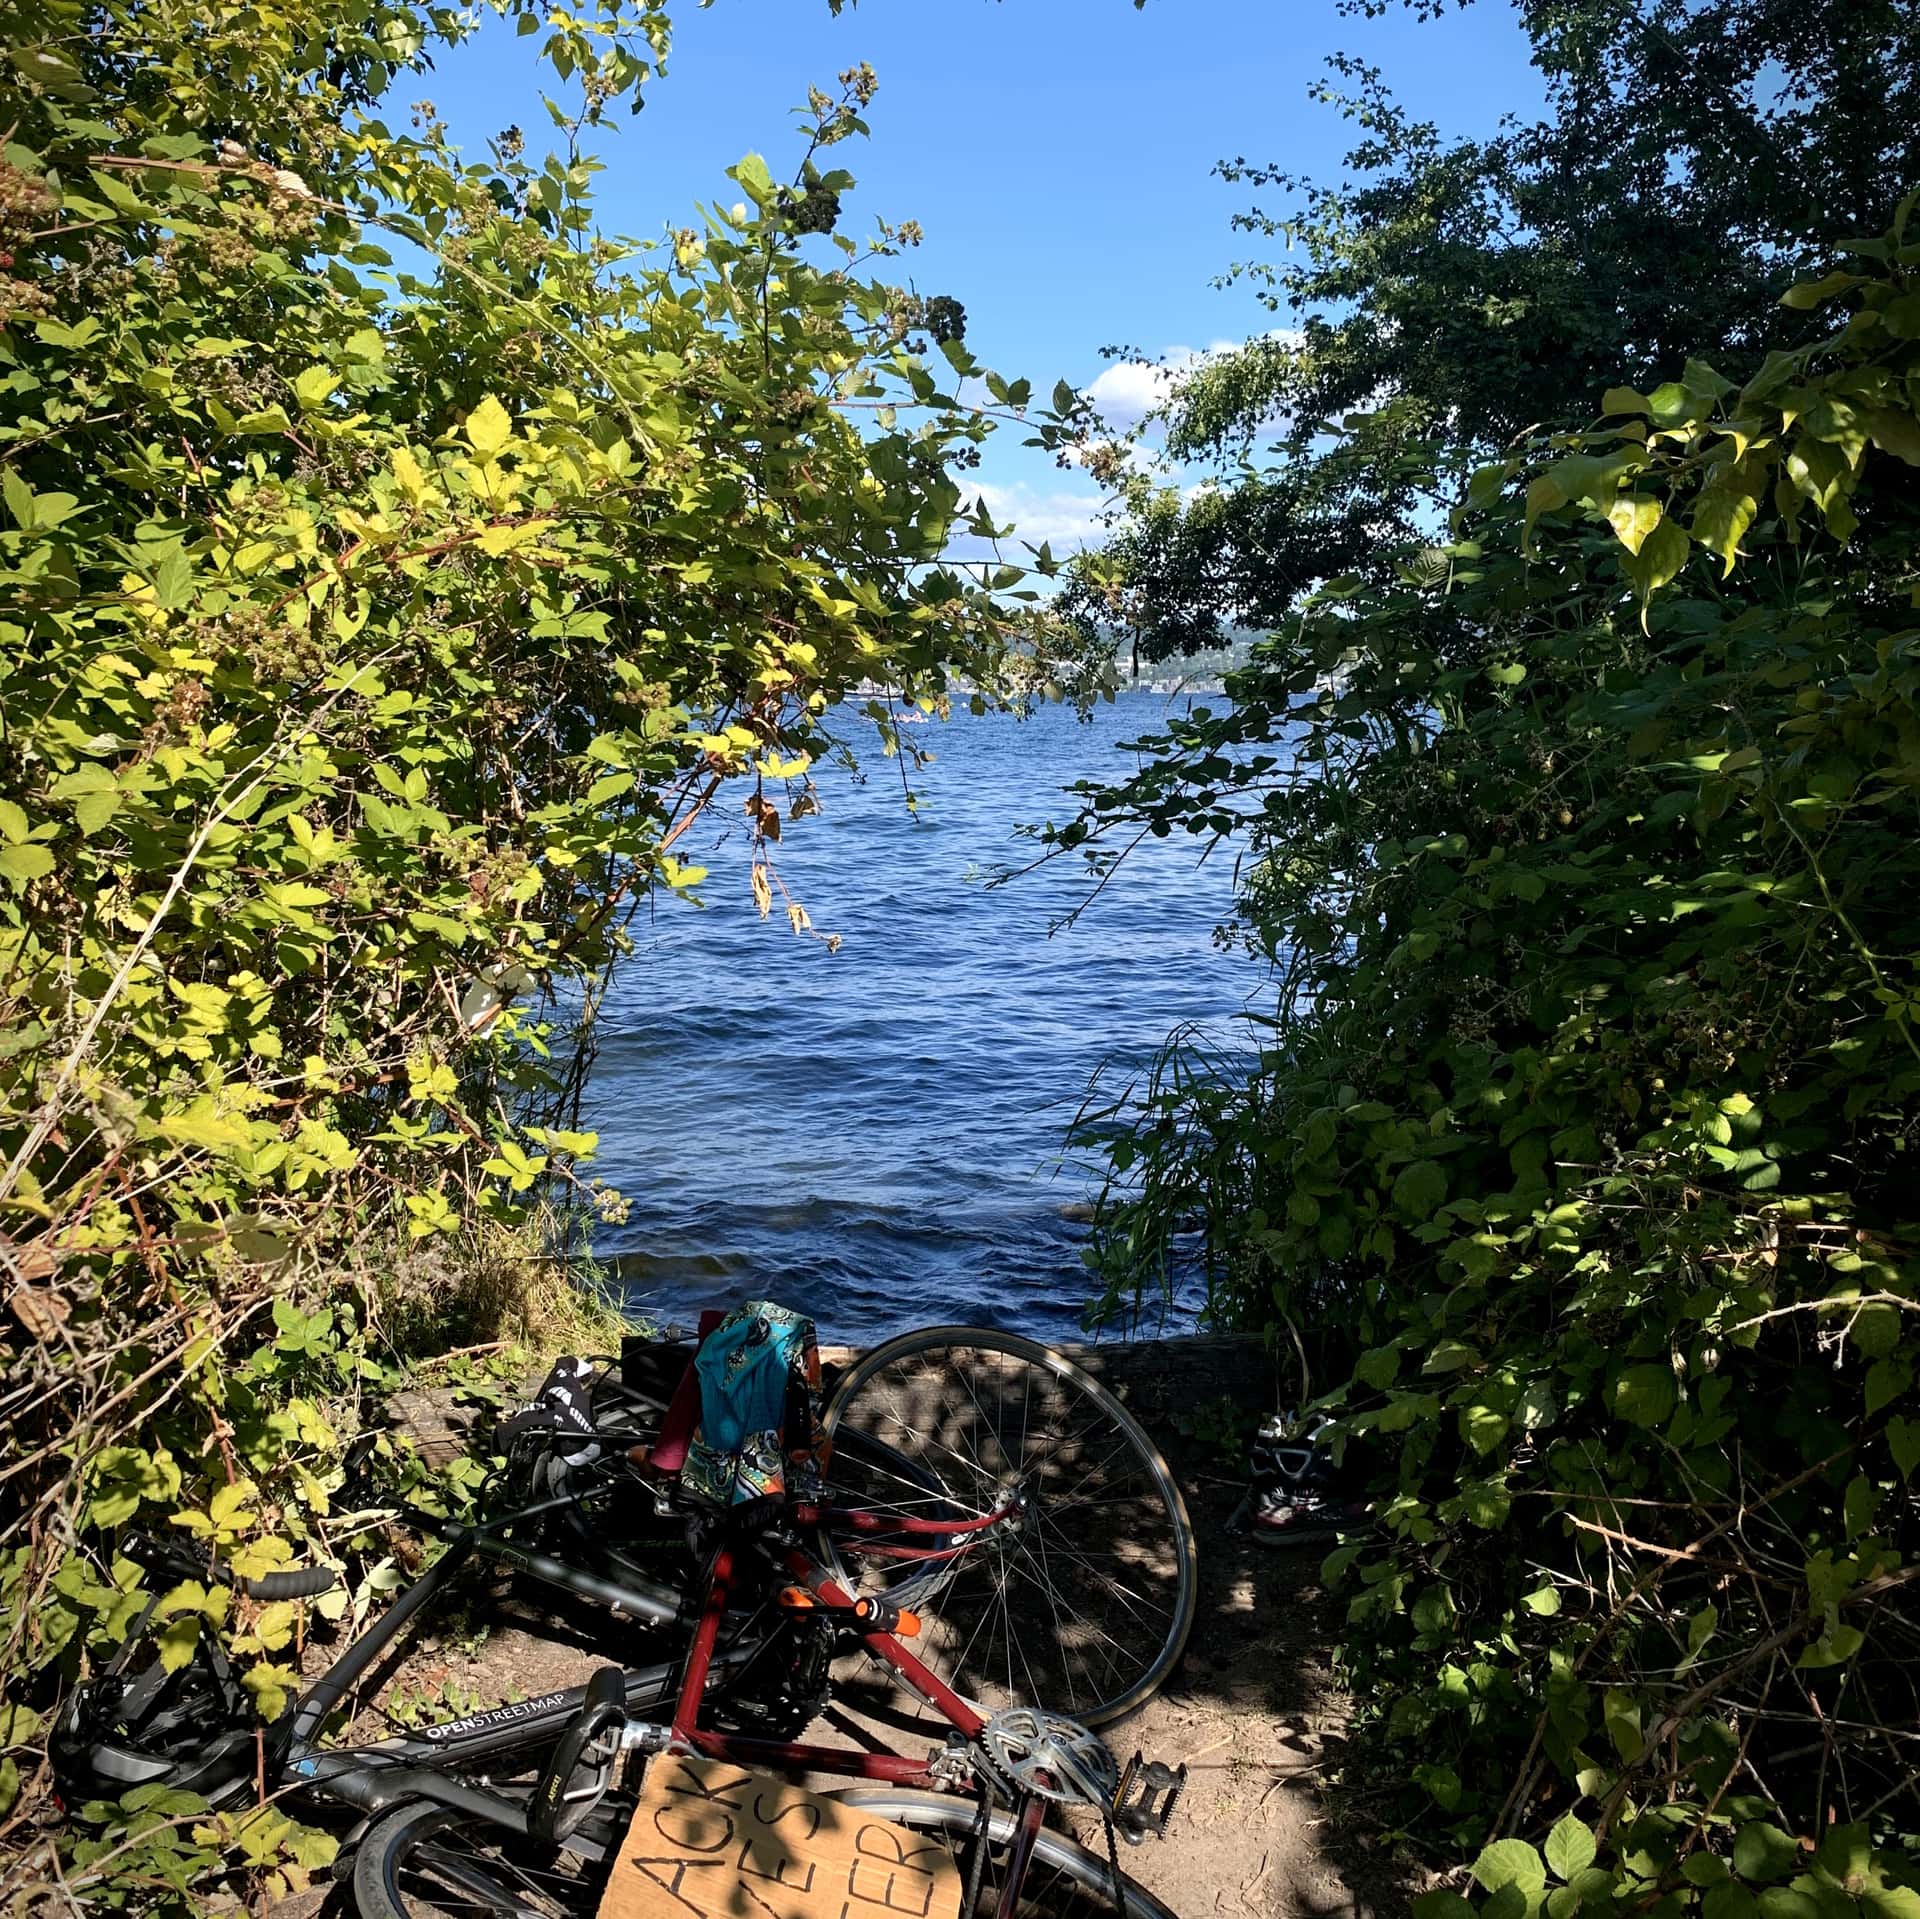 two bikes and swim gear lay at the abrupt end of a dirt path to Lake Washington, the water framed by a tunnel of foliage